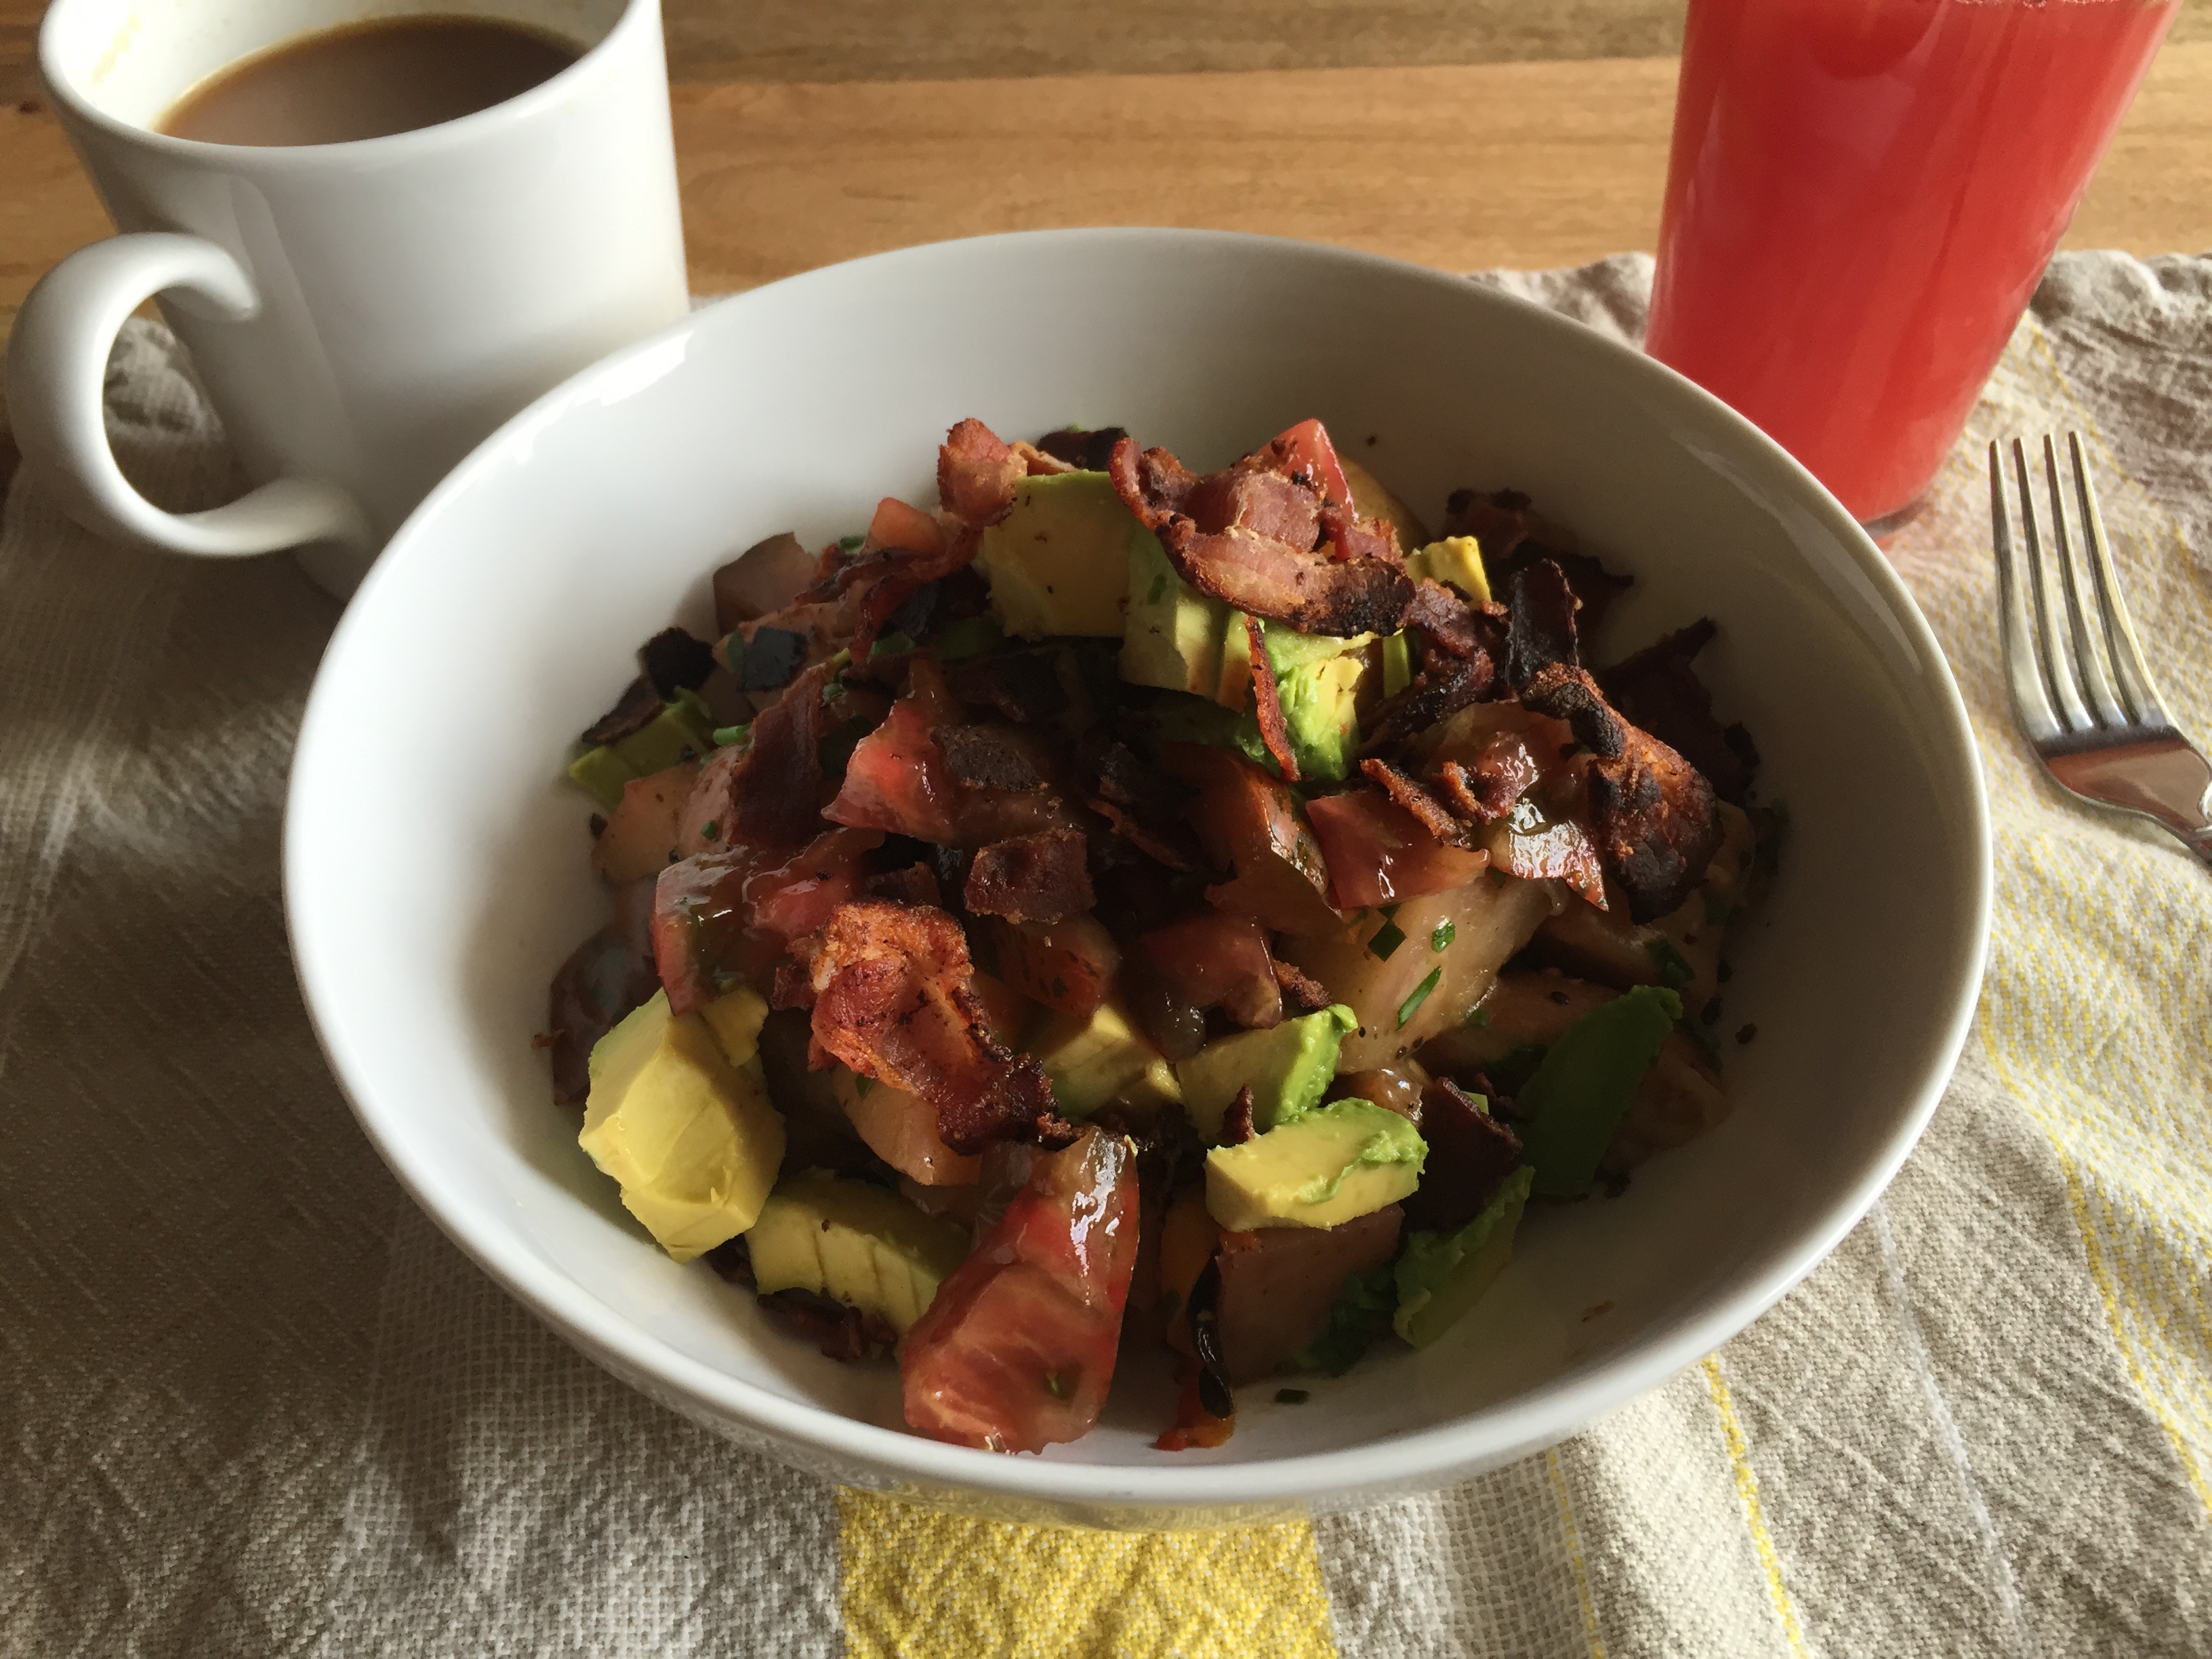 sunday fun day – brunch at home